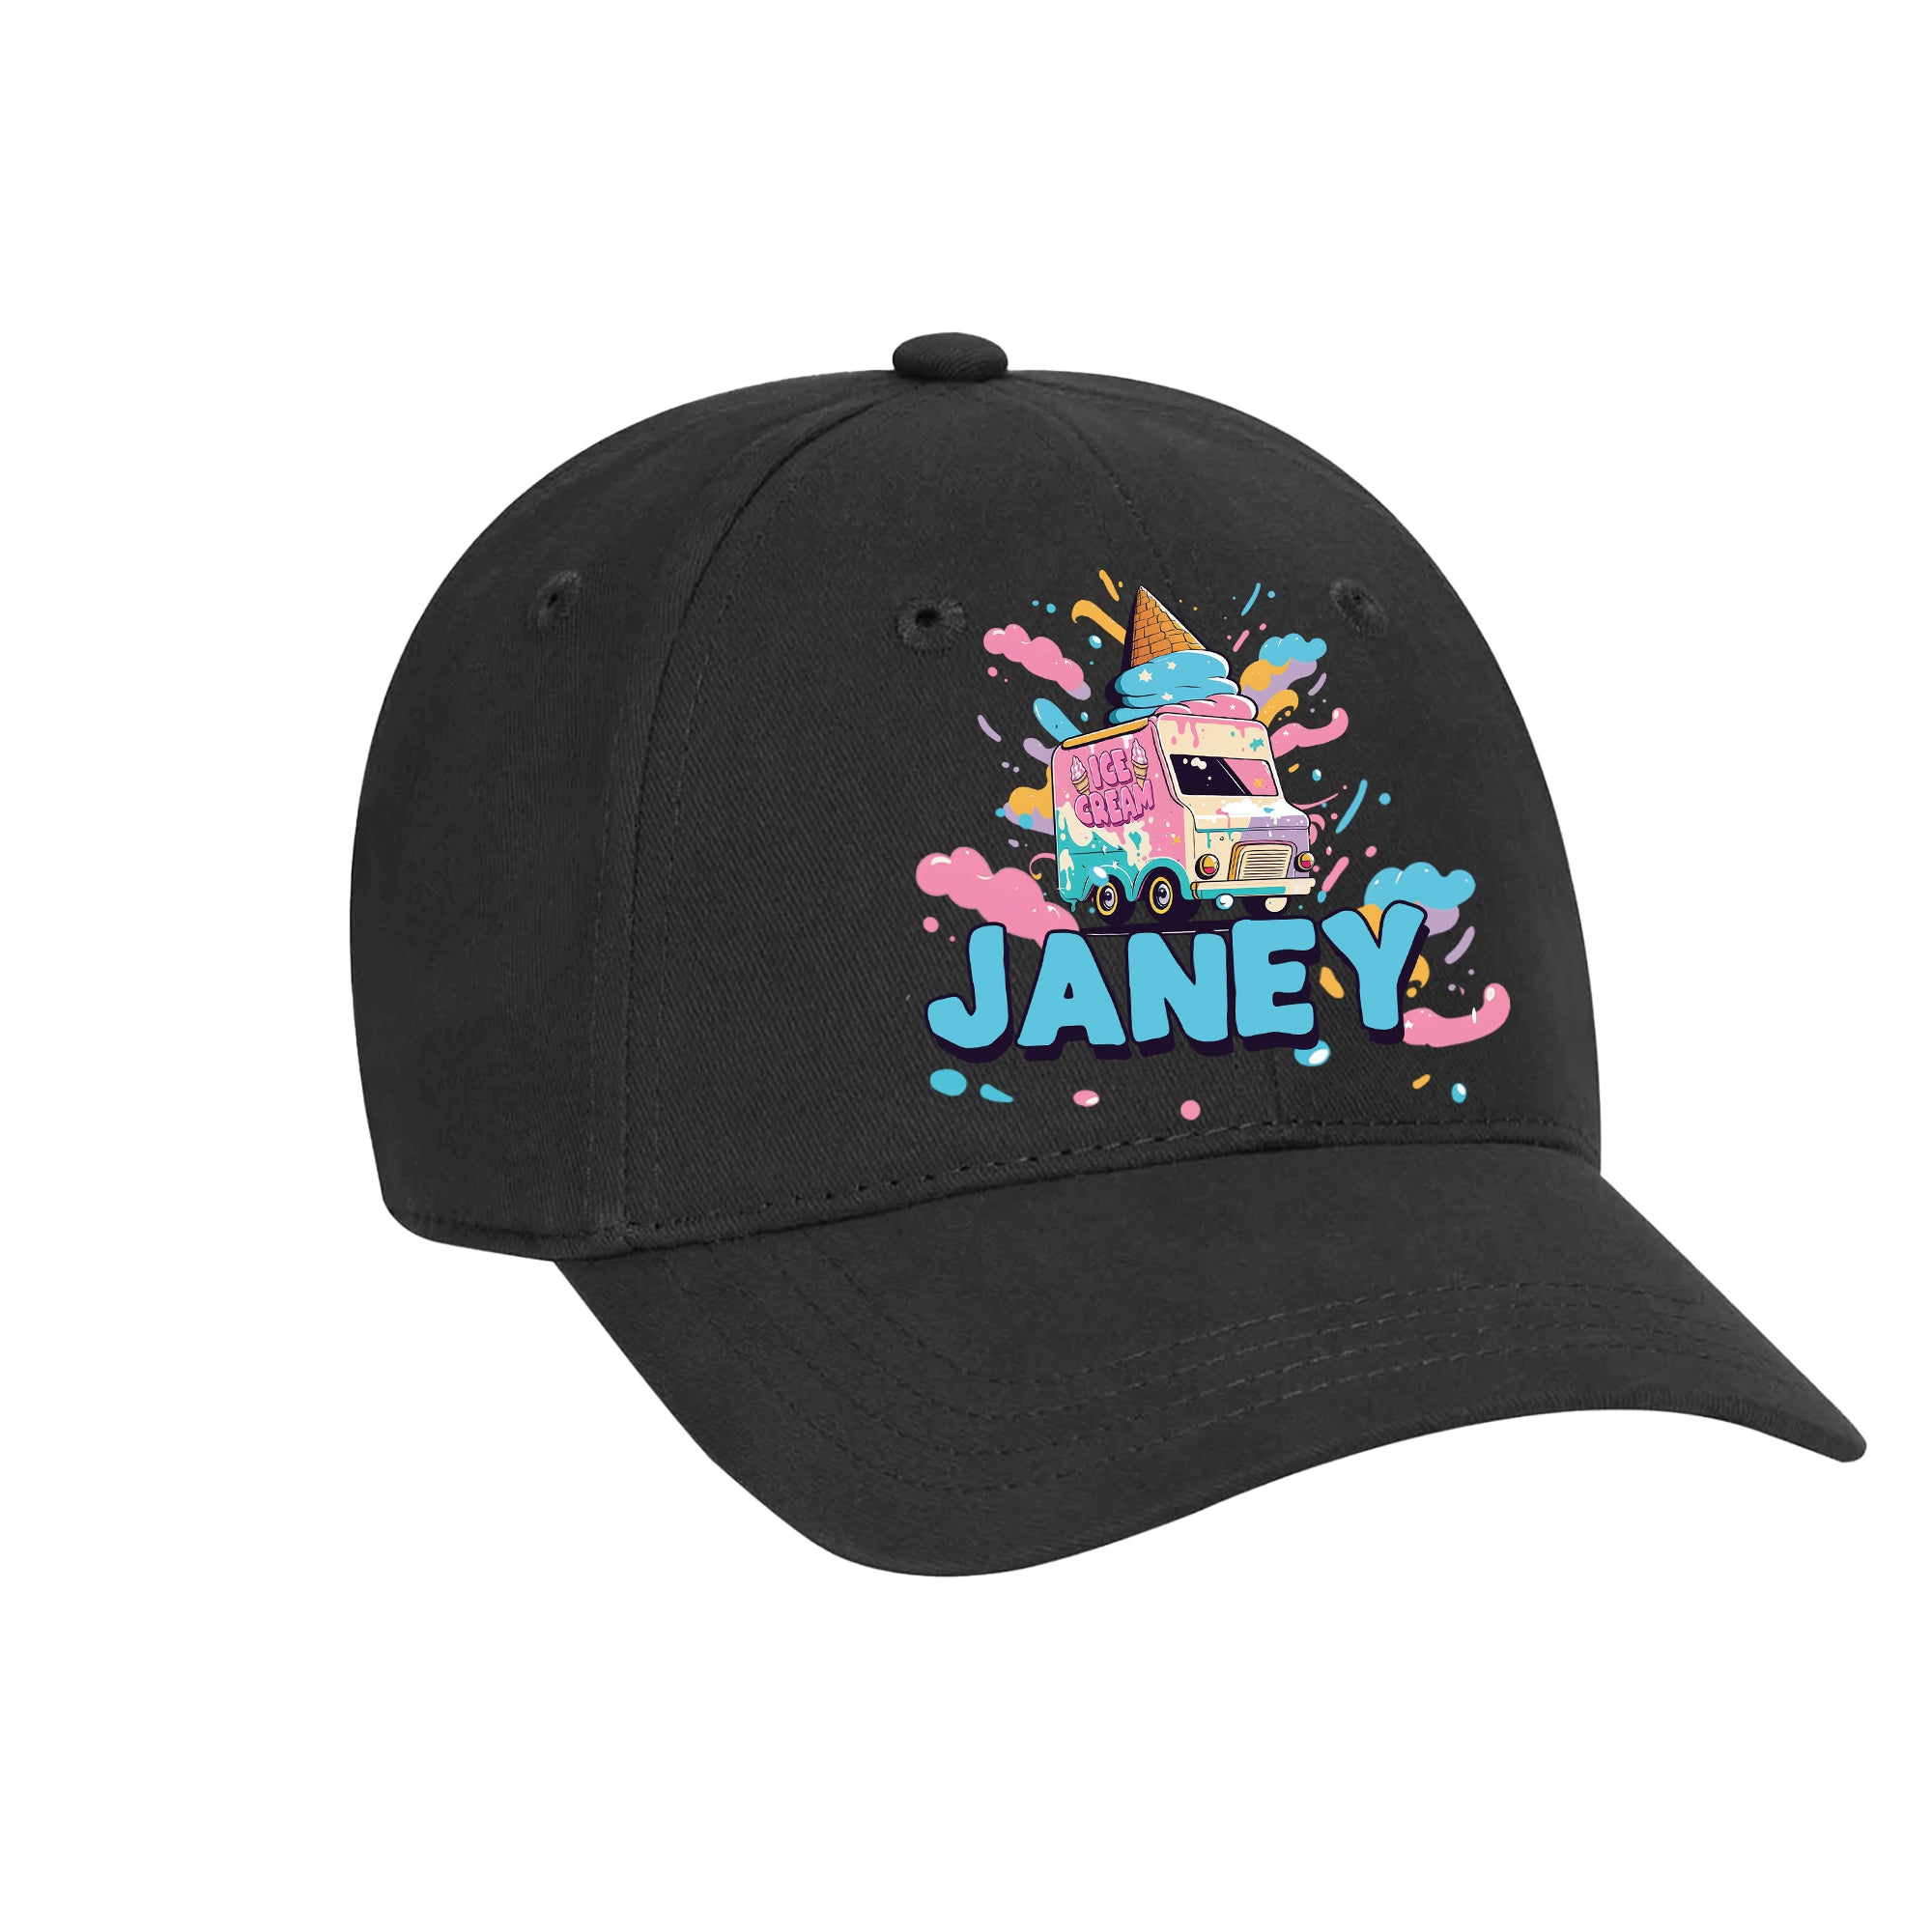 KIDS Personalized Hat - Ice Cream Truck Name